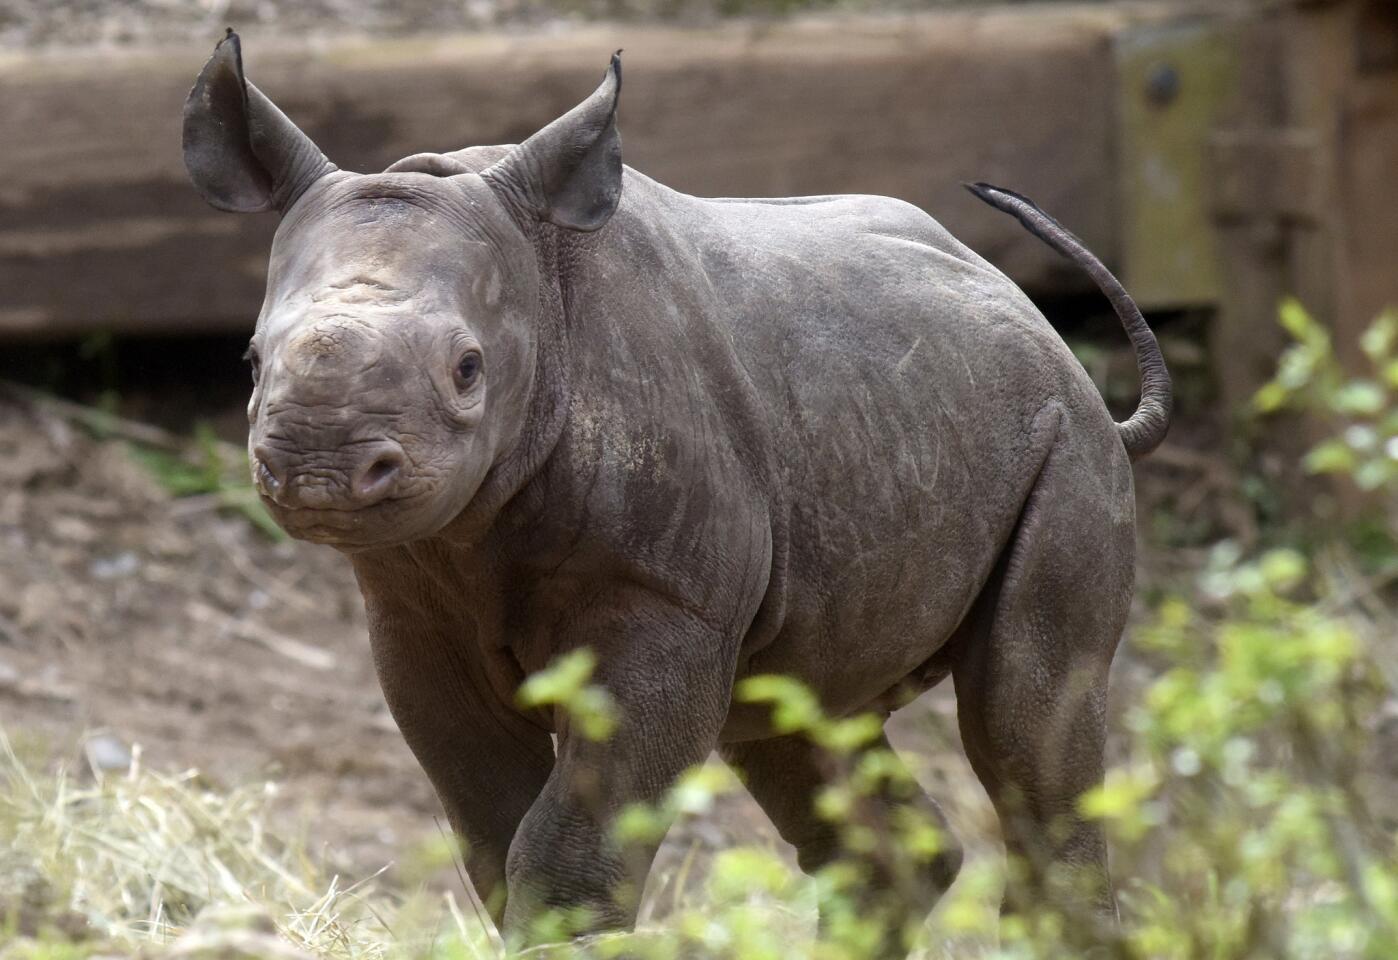 A four-week old black rhino calf makes her first public appearance at the side of her mother Azizi at the Pittsburgh Zoo & PPG Aquarium in the Highland Park section of Pittsburgh, on April 14, 2017.